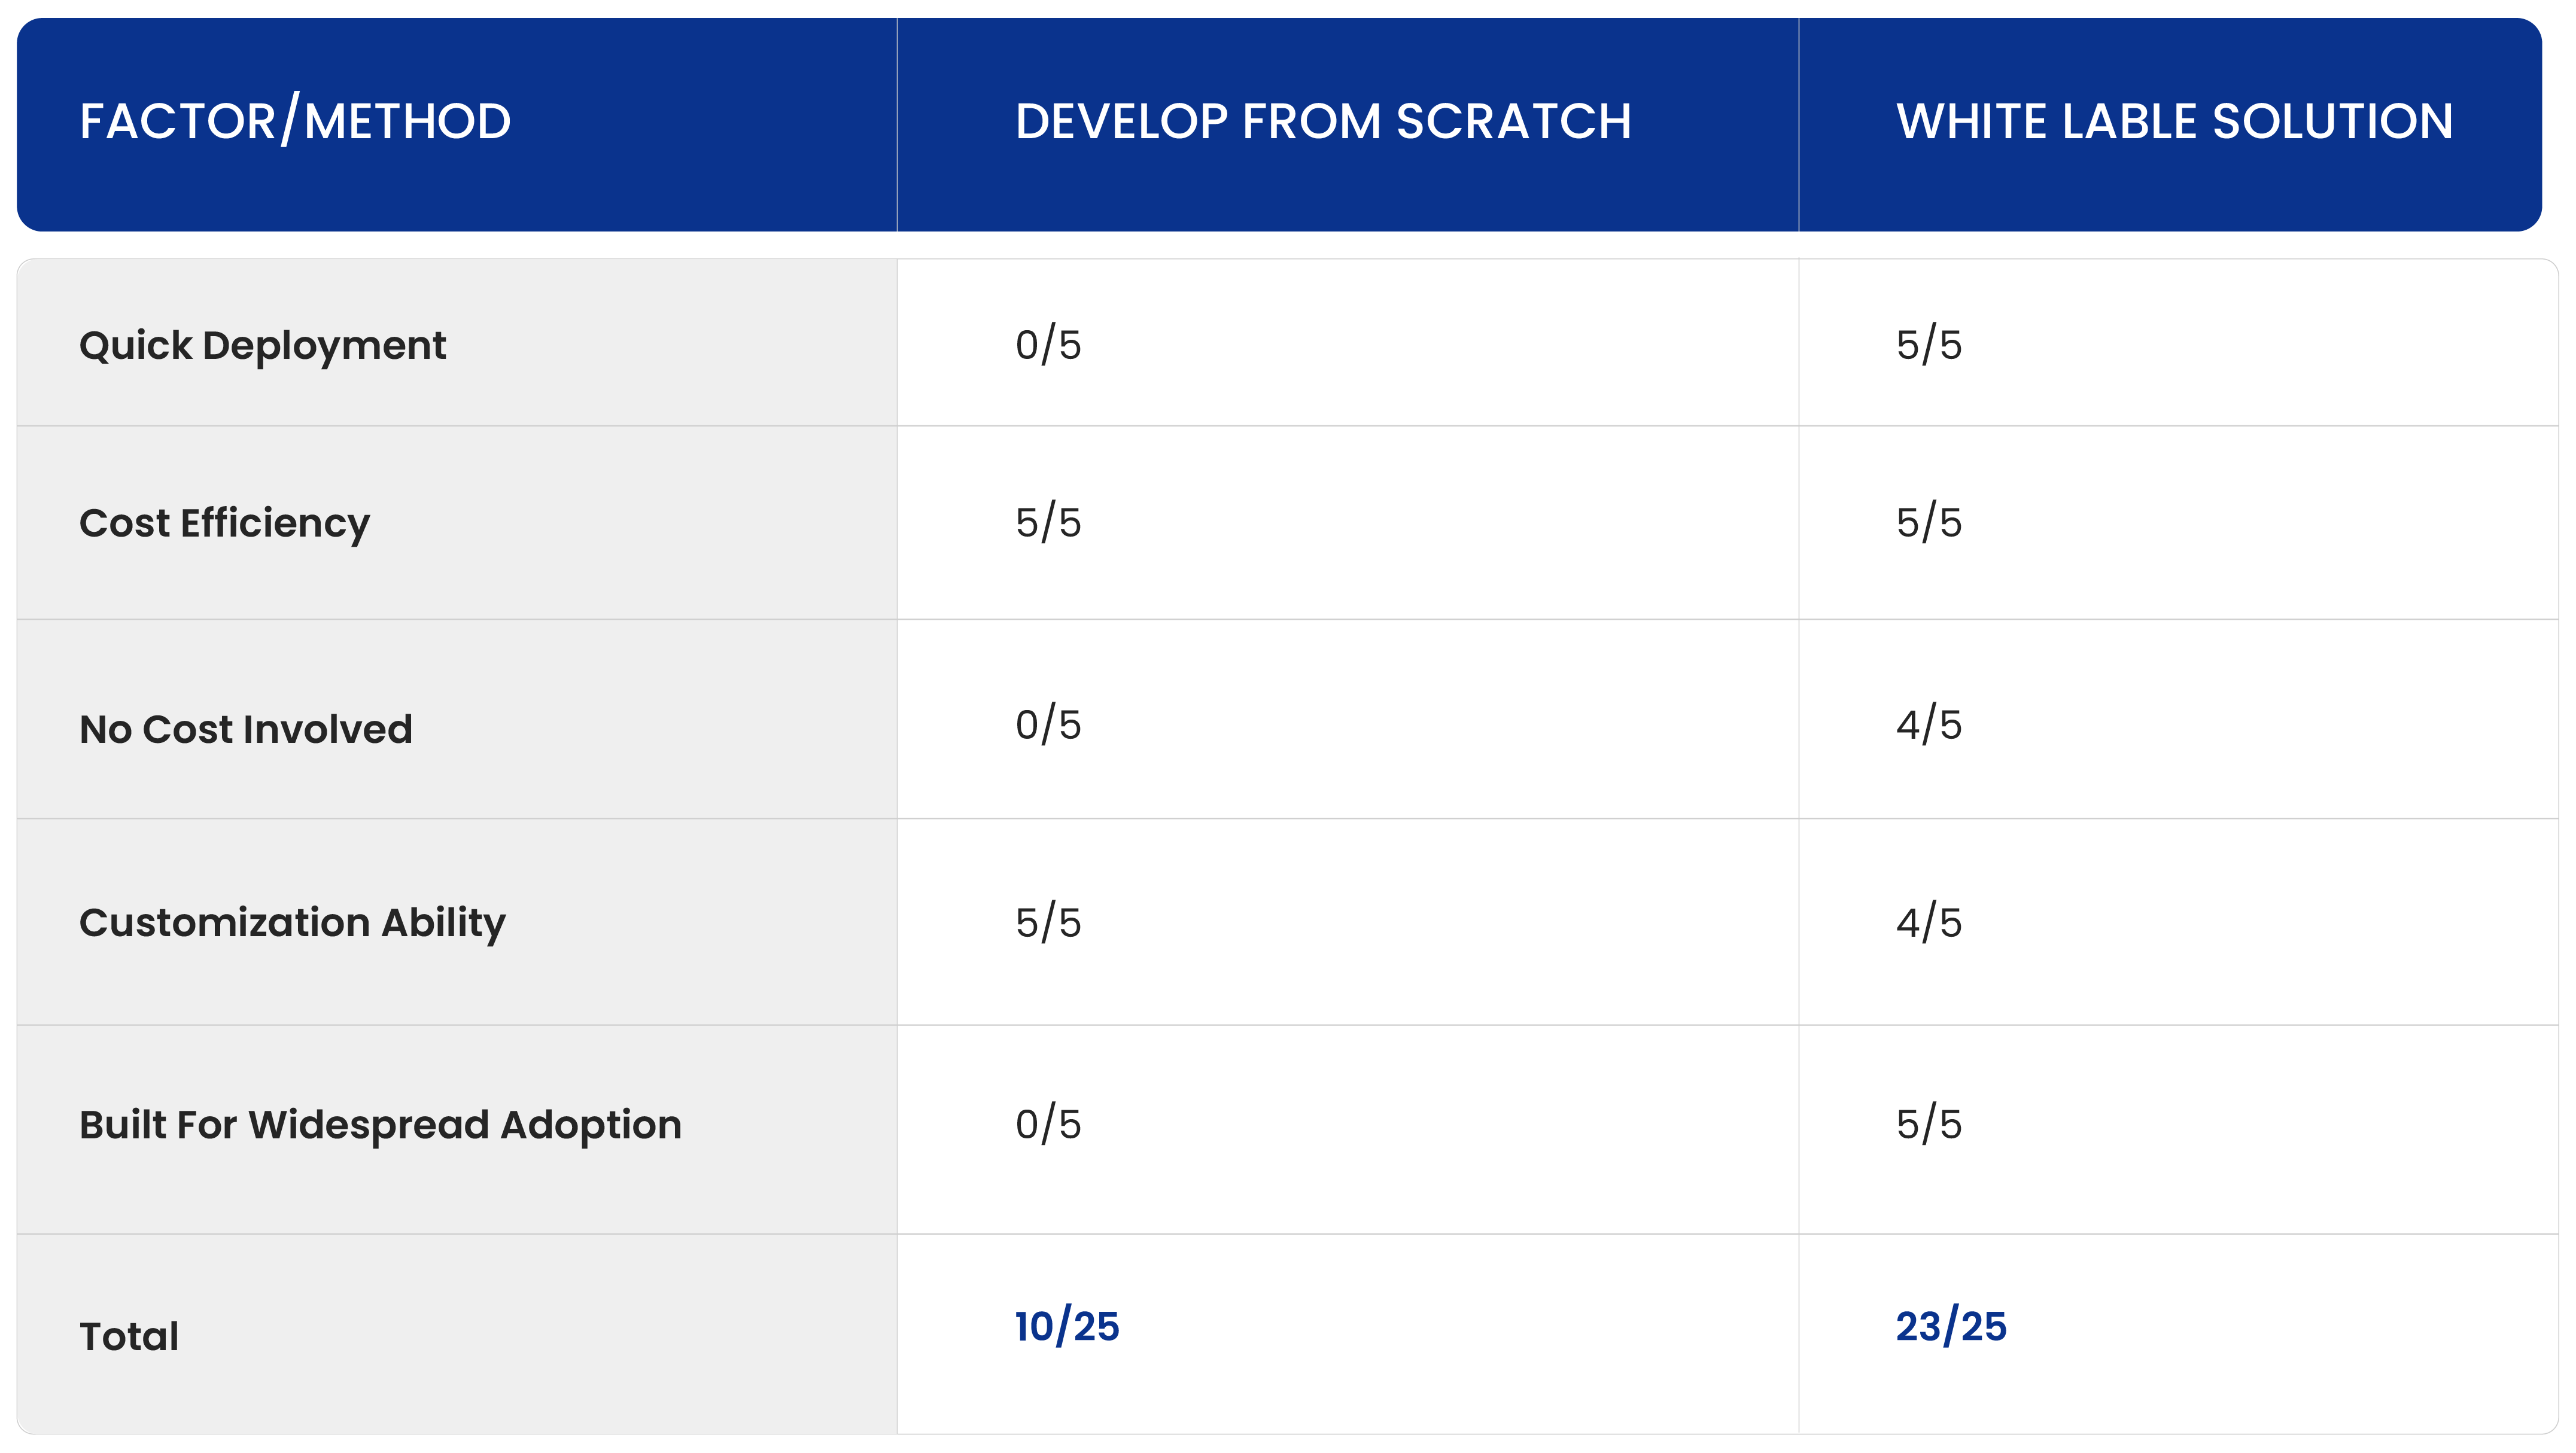 Comparison Table of Develop from scratch and White label solution